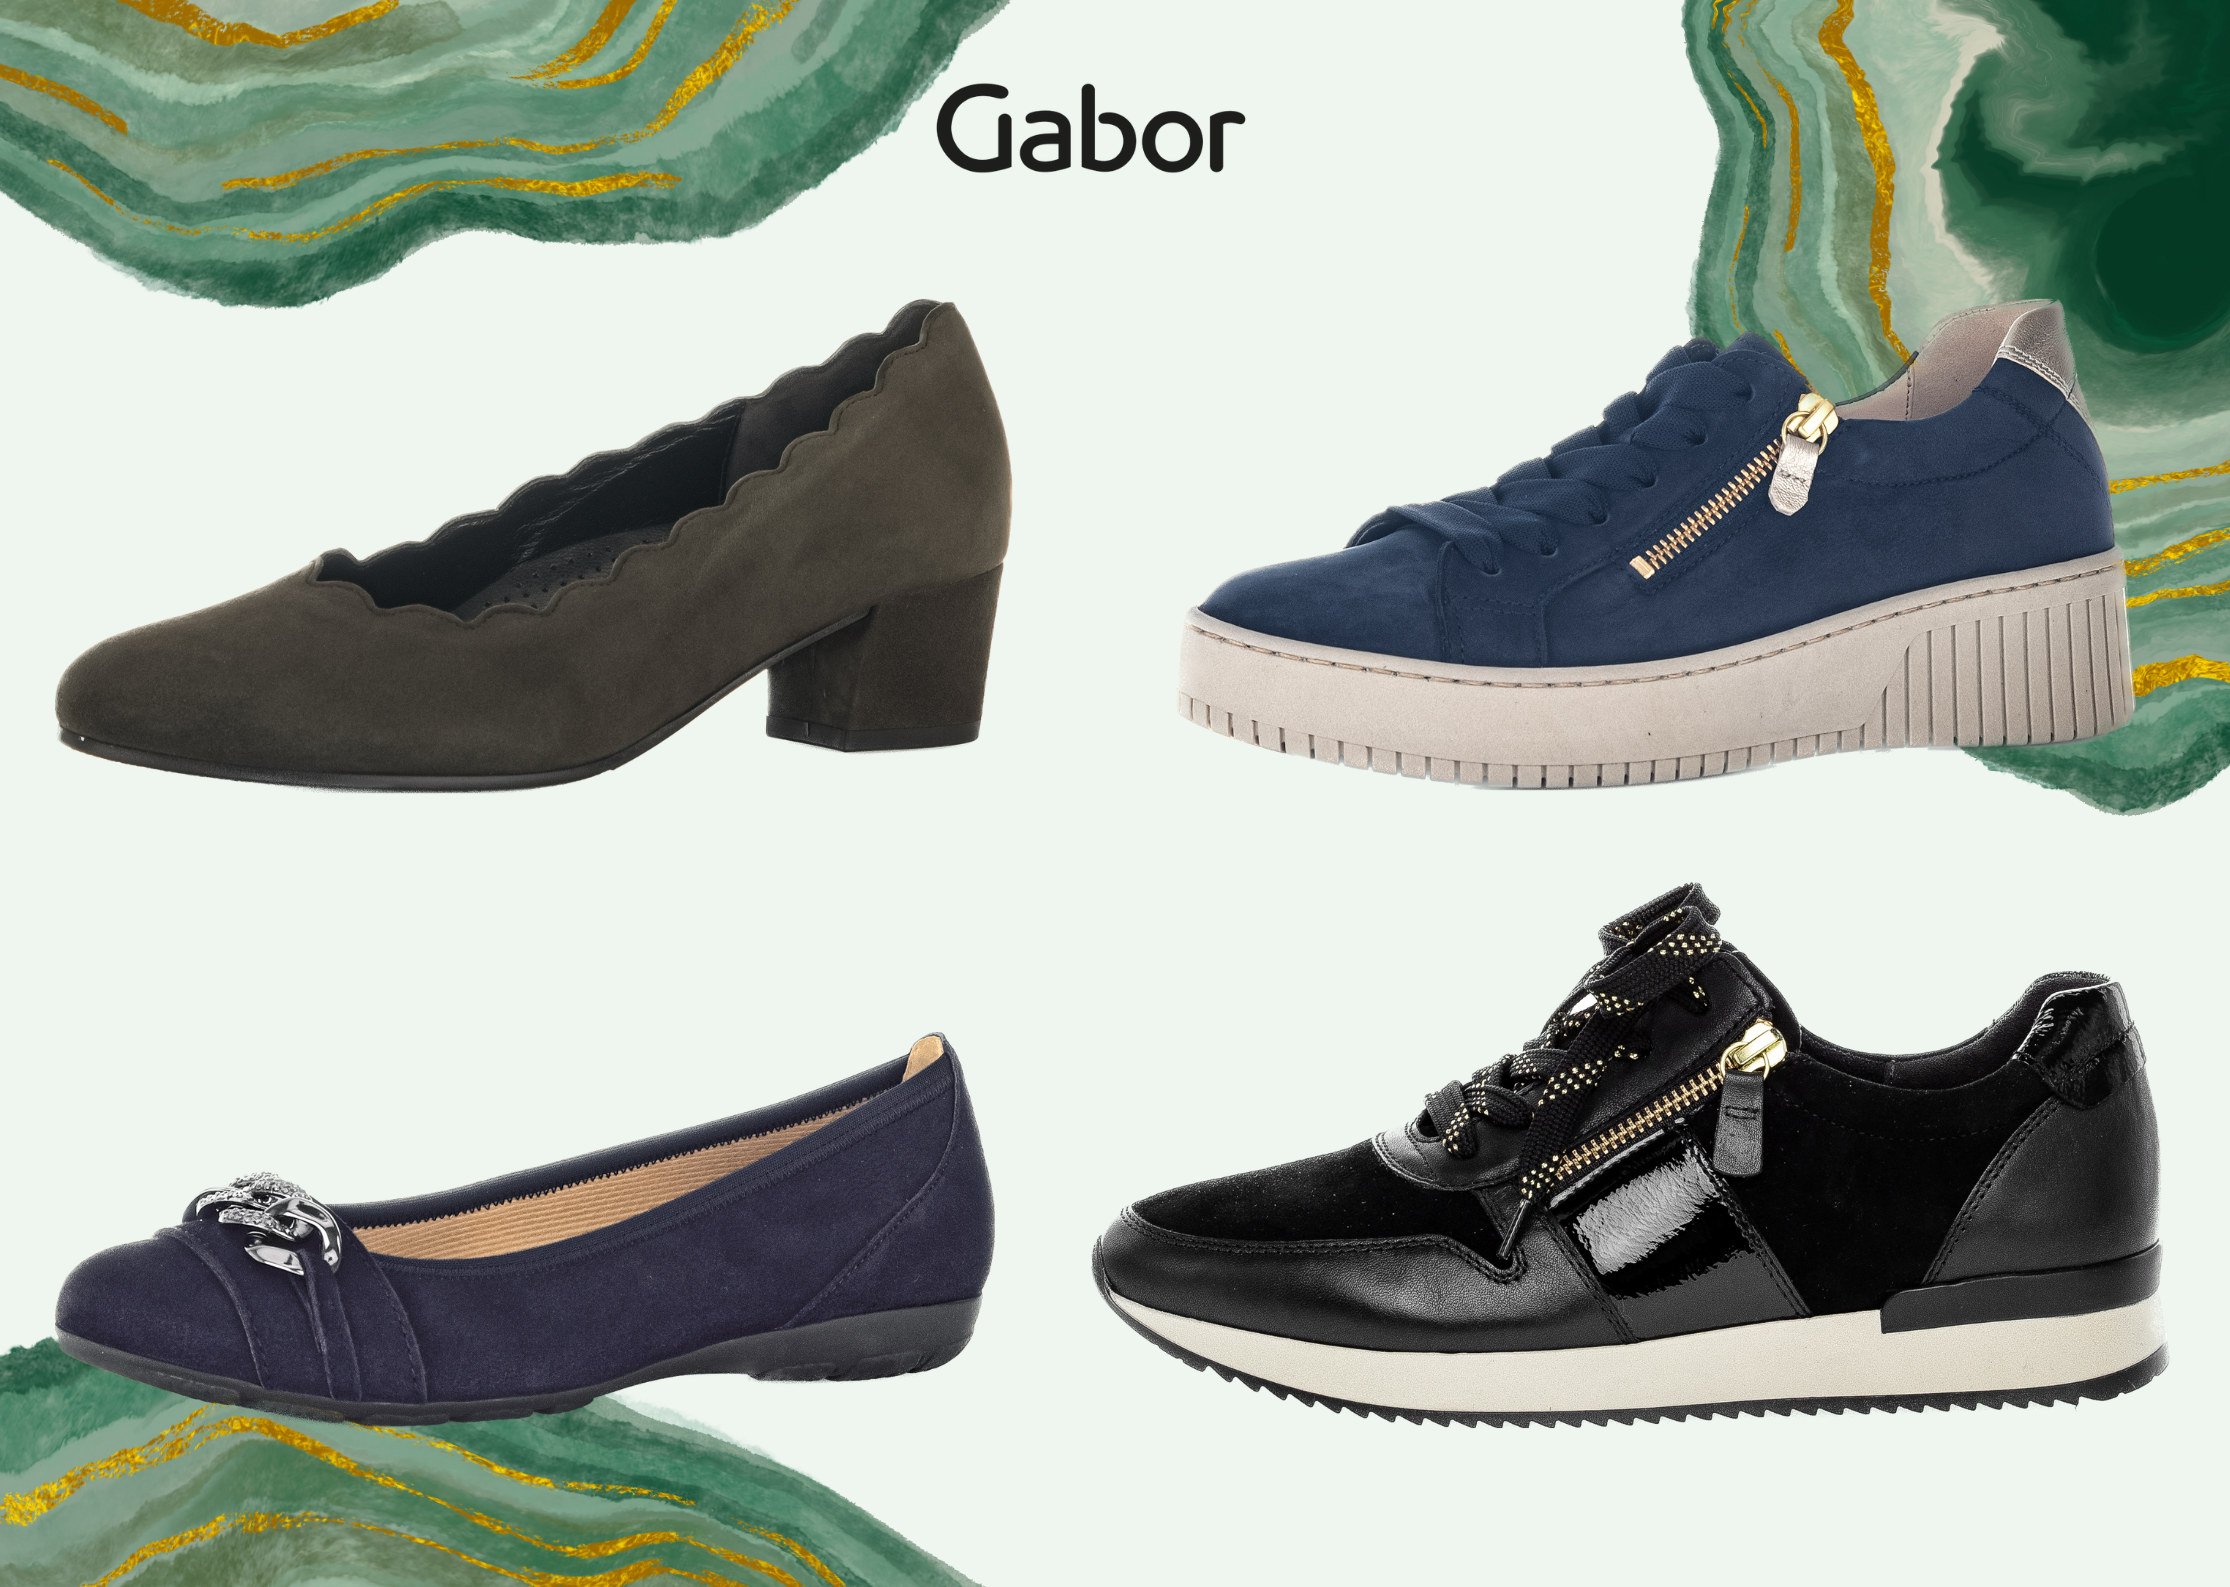 nouvelle collection Gabor Roux Chaussures